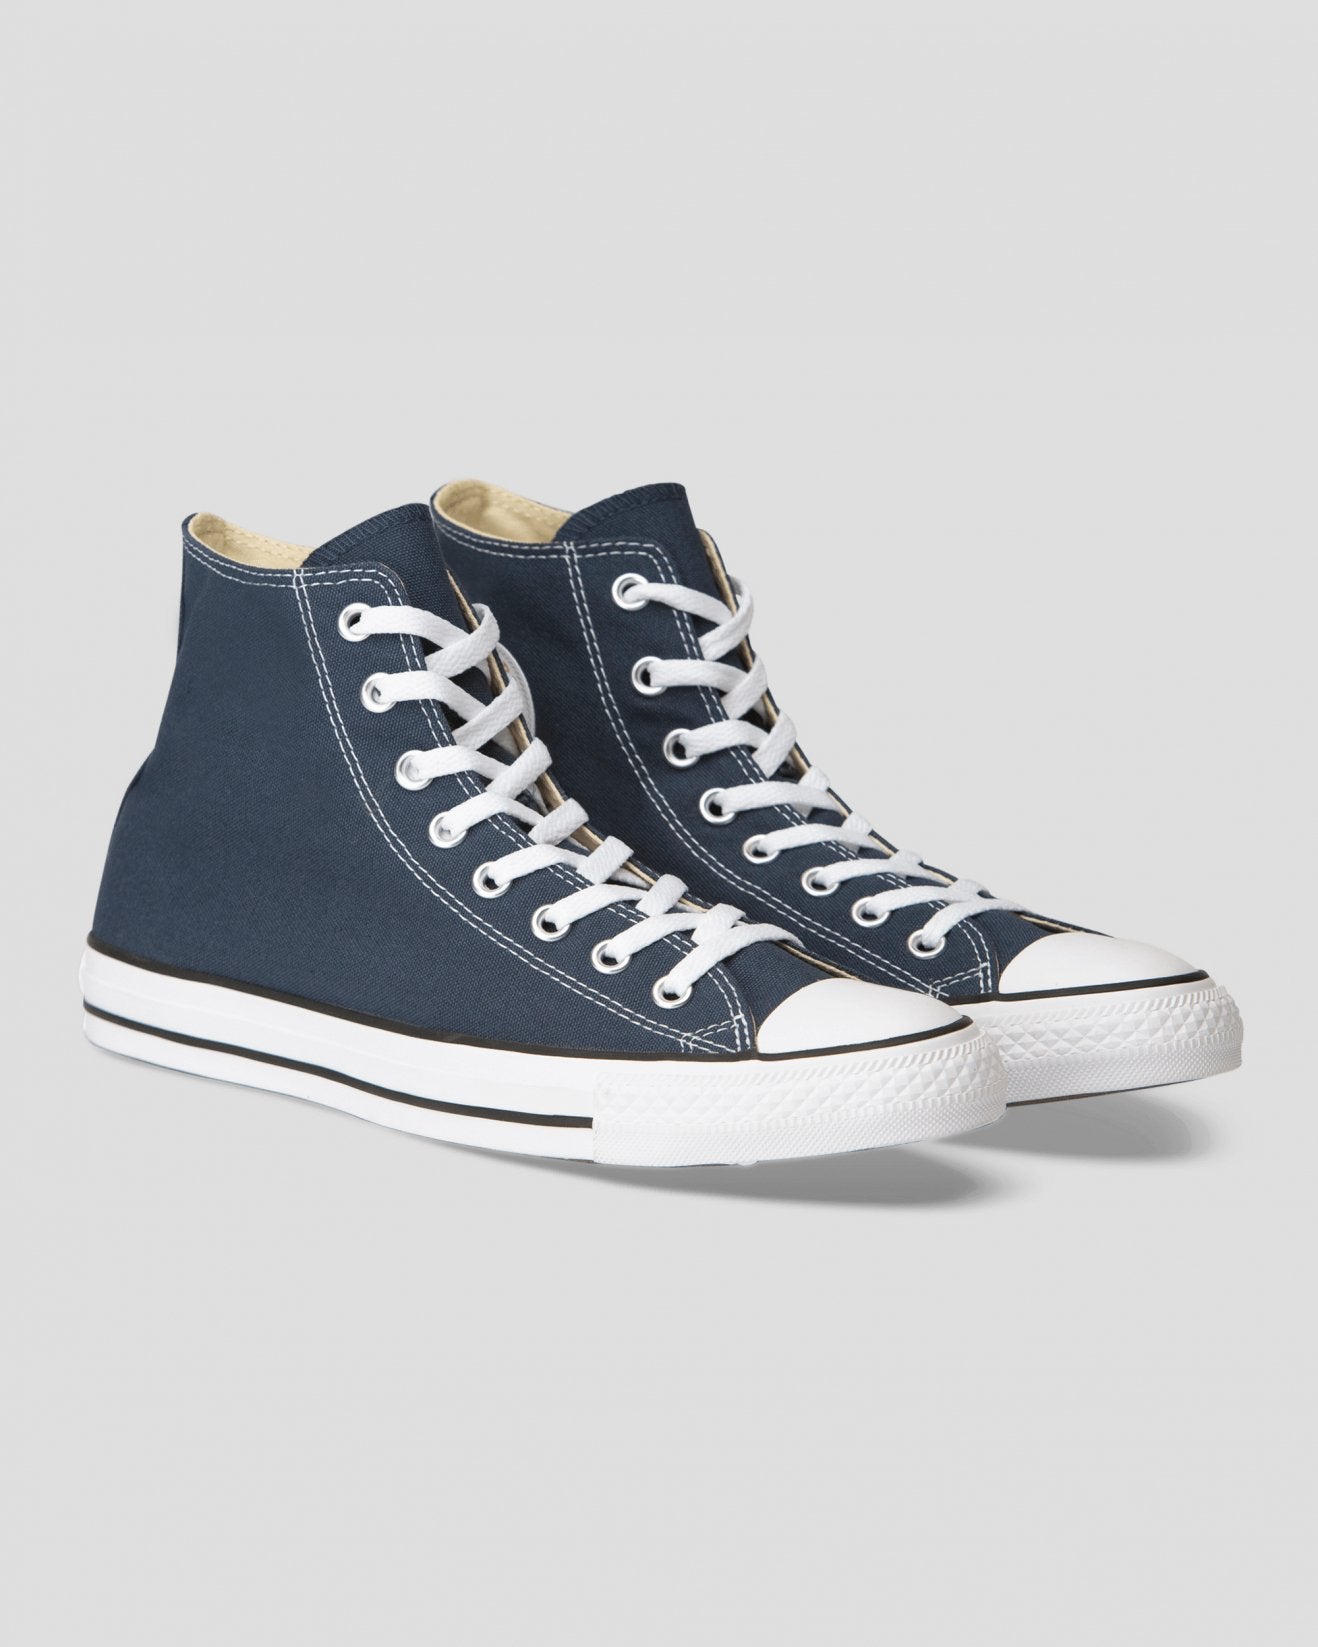 Unisex Converse Chuck Taylor All Star Classic Colour High Top Navy-150759c - Discount Store